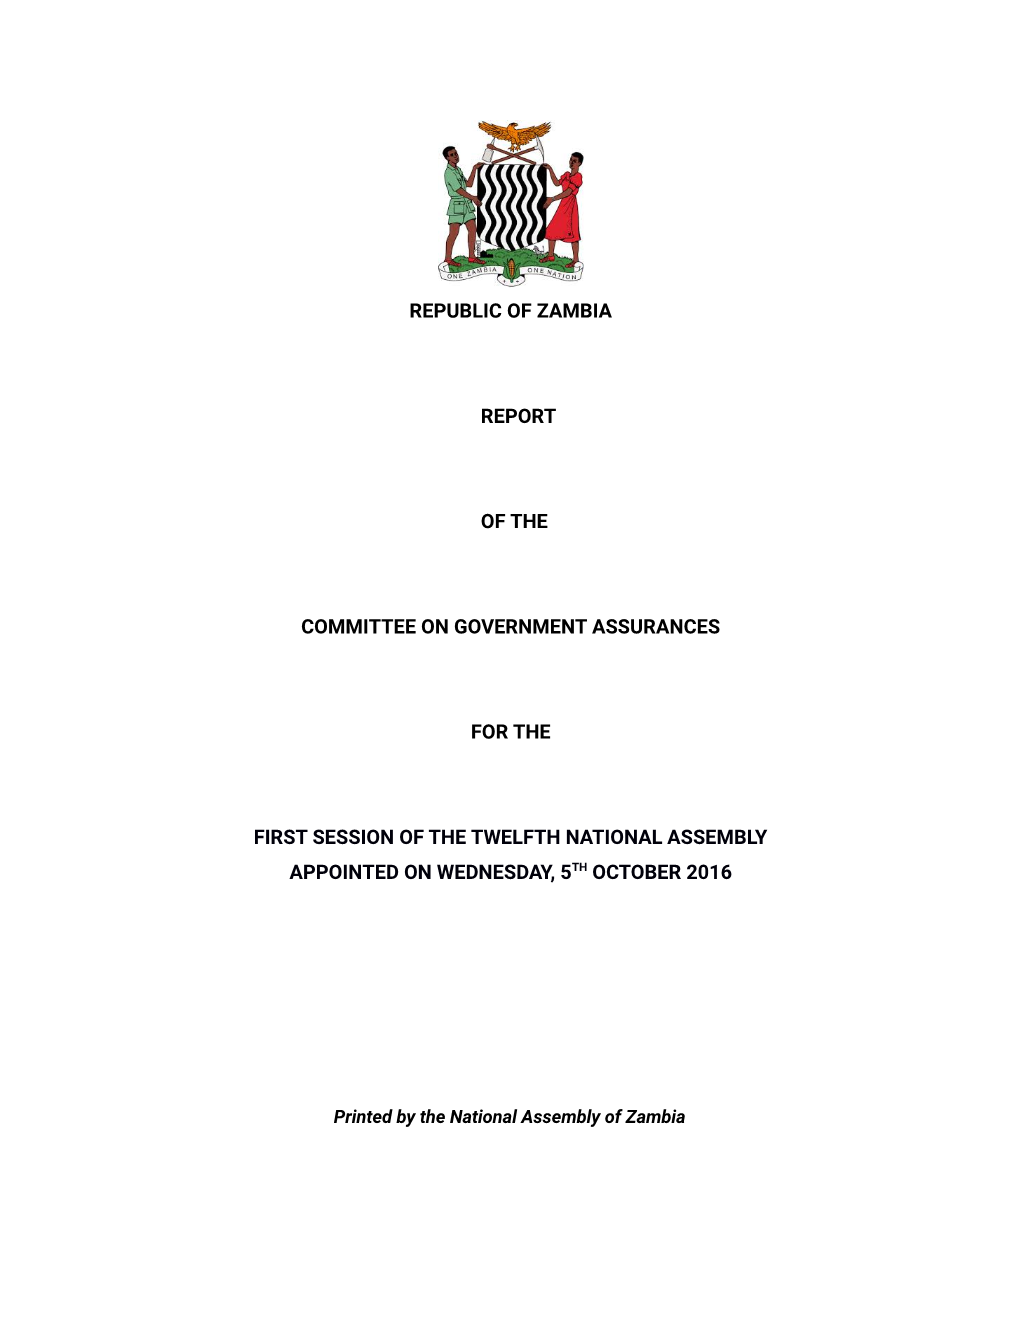 Republic of Zambia Report of the Committee on Government Assurances for the First Session of the Twelfth National Assembly Appoi